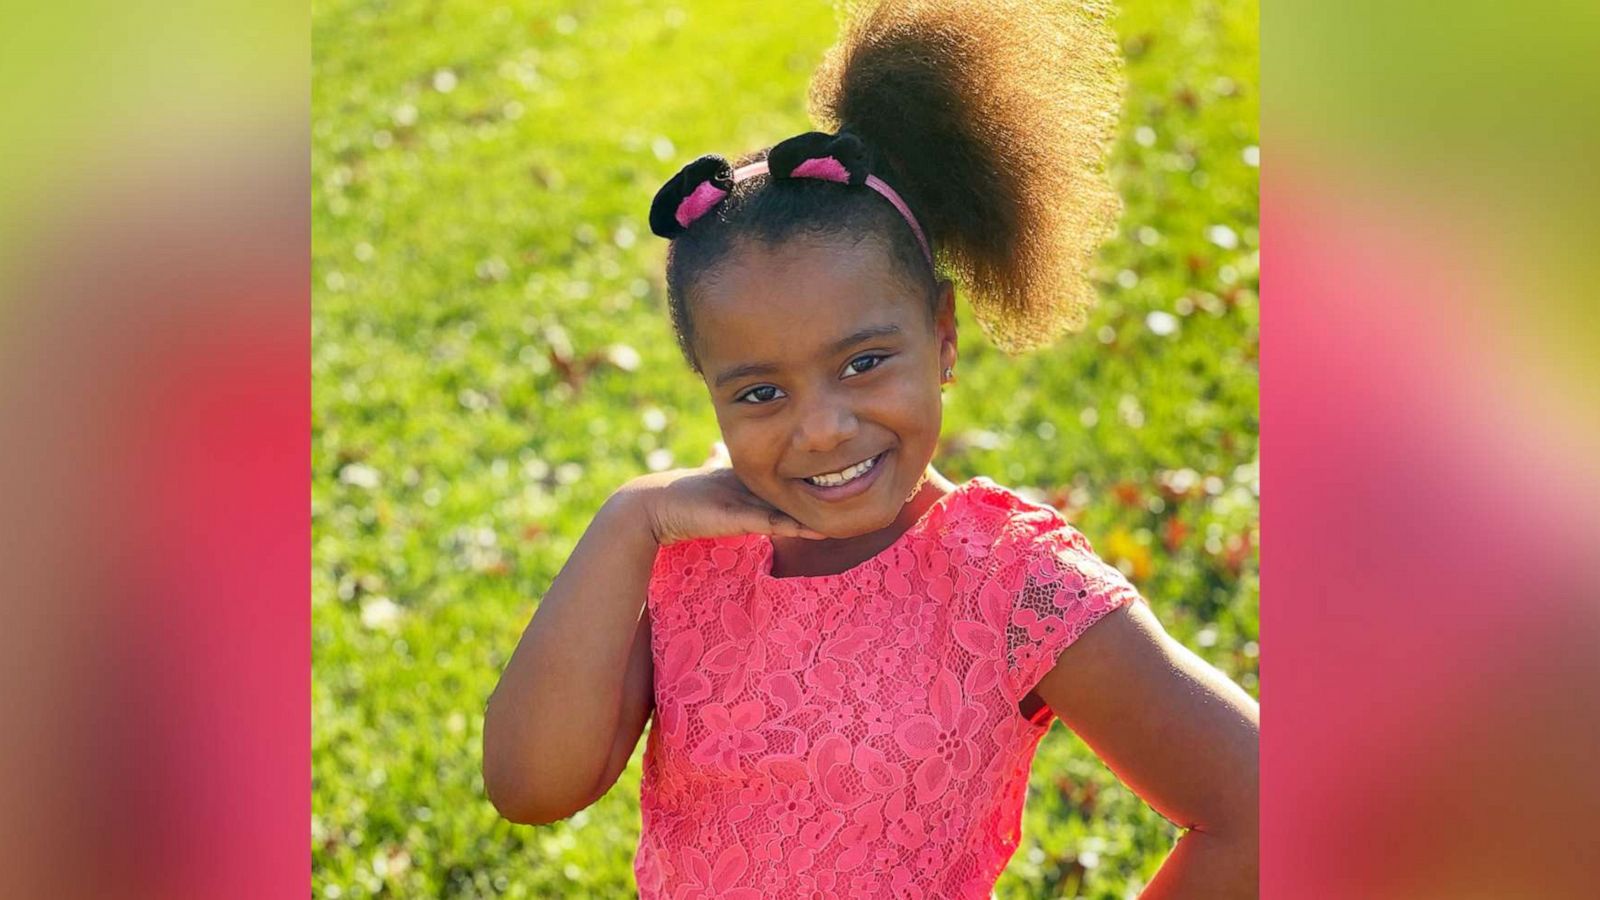 PHOTO: Morgan Bugg, 7, from Brentwood, Tennessee, convinced the educational app Freckle to include Black hairstyles in its avatar options.